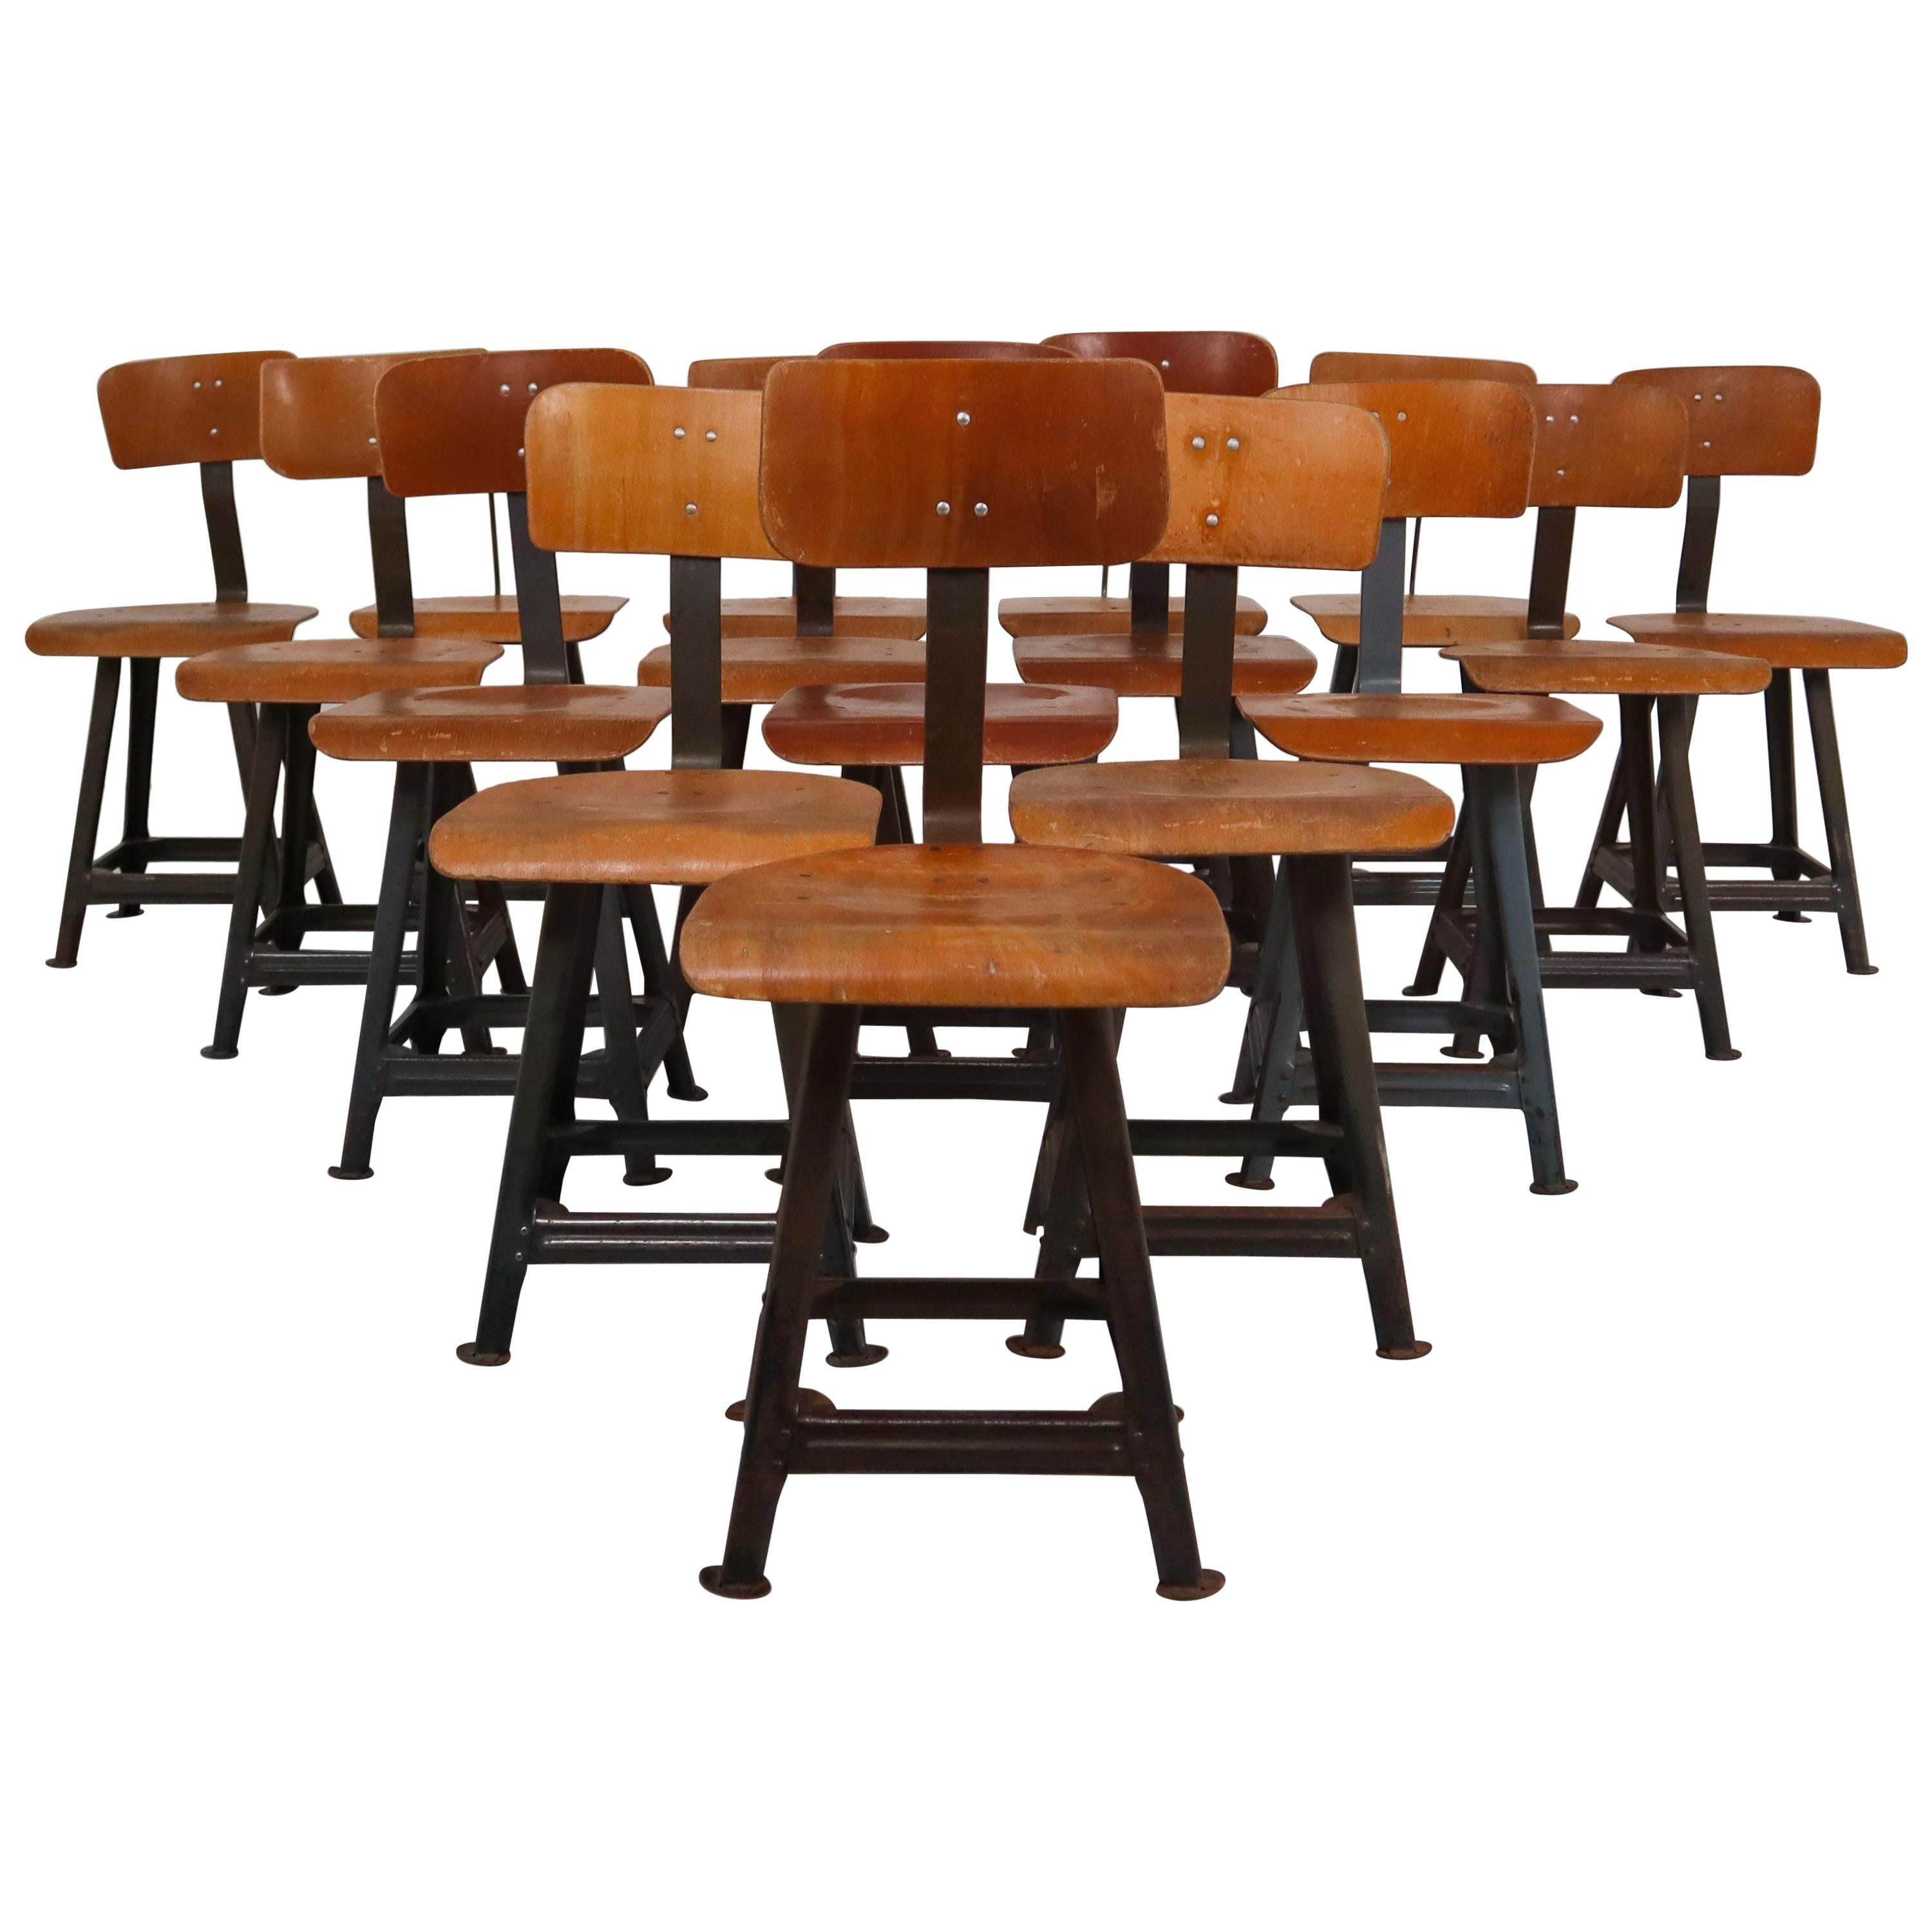 16 Industrial Chairs by Robert Wagner for Bemefa, Rowac, Germany, 1950s